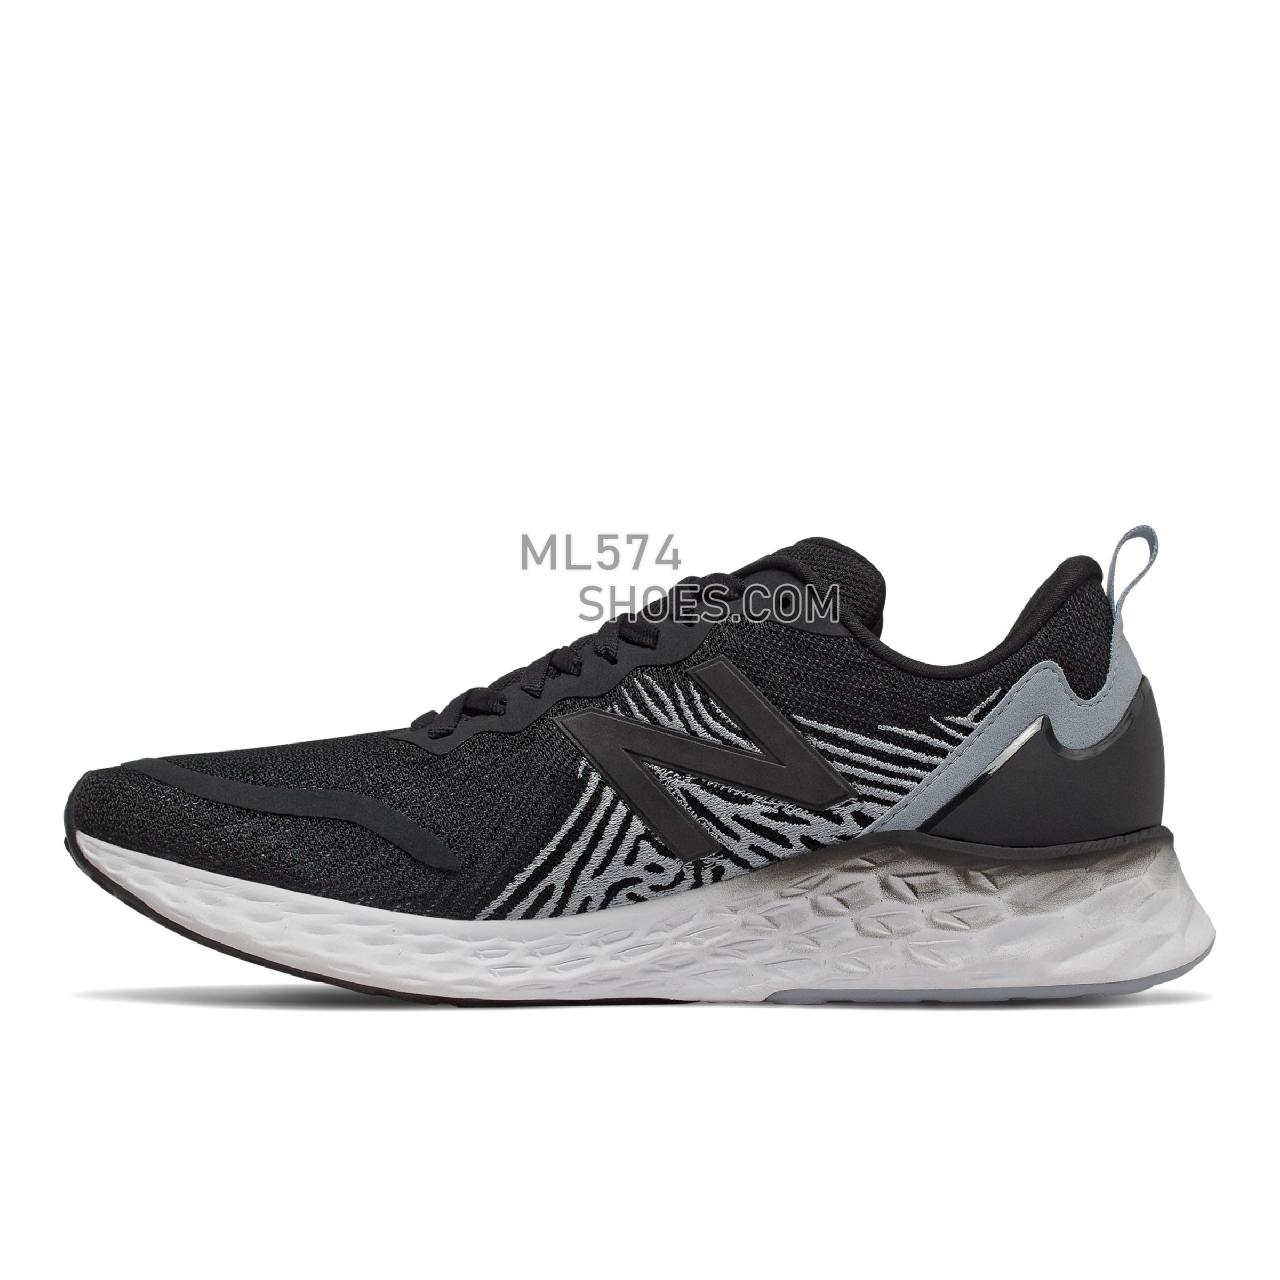 New Balance Fresh Foam Tempo - Men's Neutral Running - Black with Lead and Summer Fog - MTMPOBK